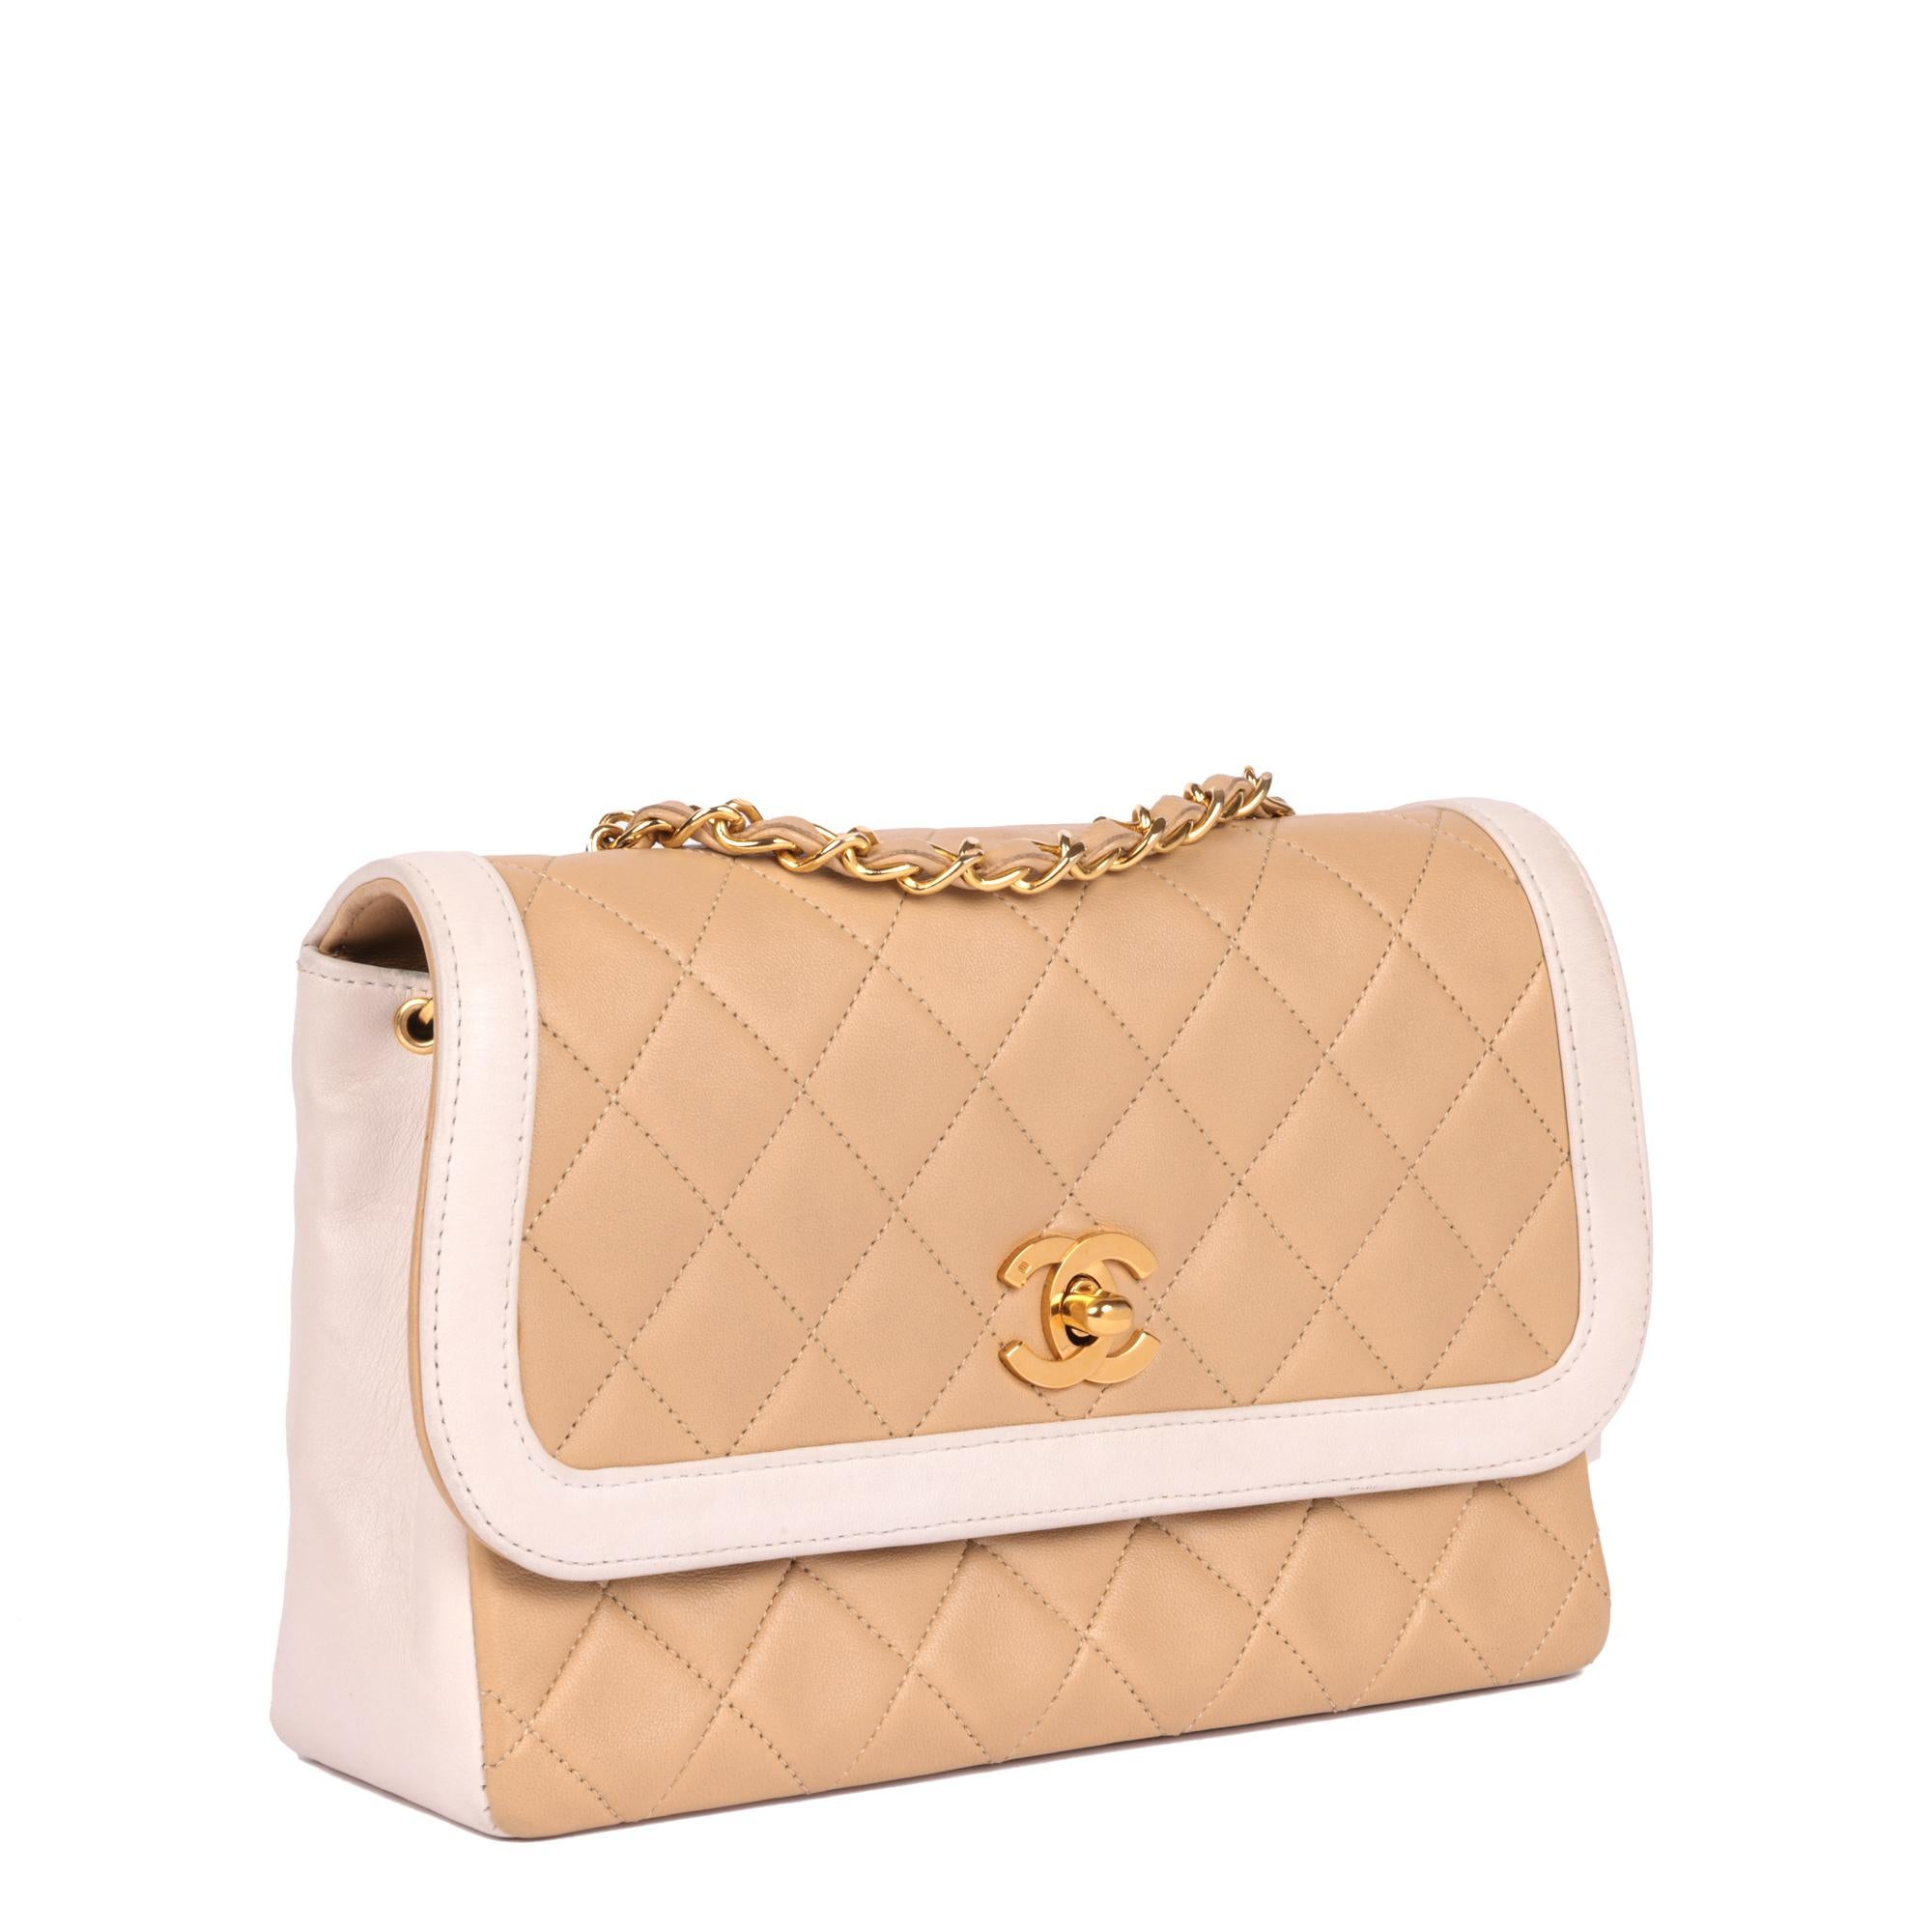 CHANEL
Beige & White Quilted Lambskin Vintage Mini Classic Single Flap Bag with Wallet

Serial Number: 1497039
Age (Circa): 1990
Accompanied By: Chanel Dust Bag, Authenticity Card
Authenticity Details: Authenticity Card, Serial Sticker (Made in